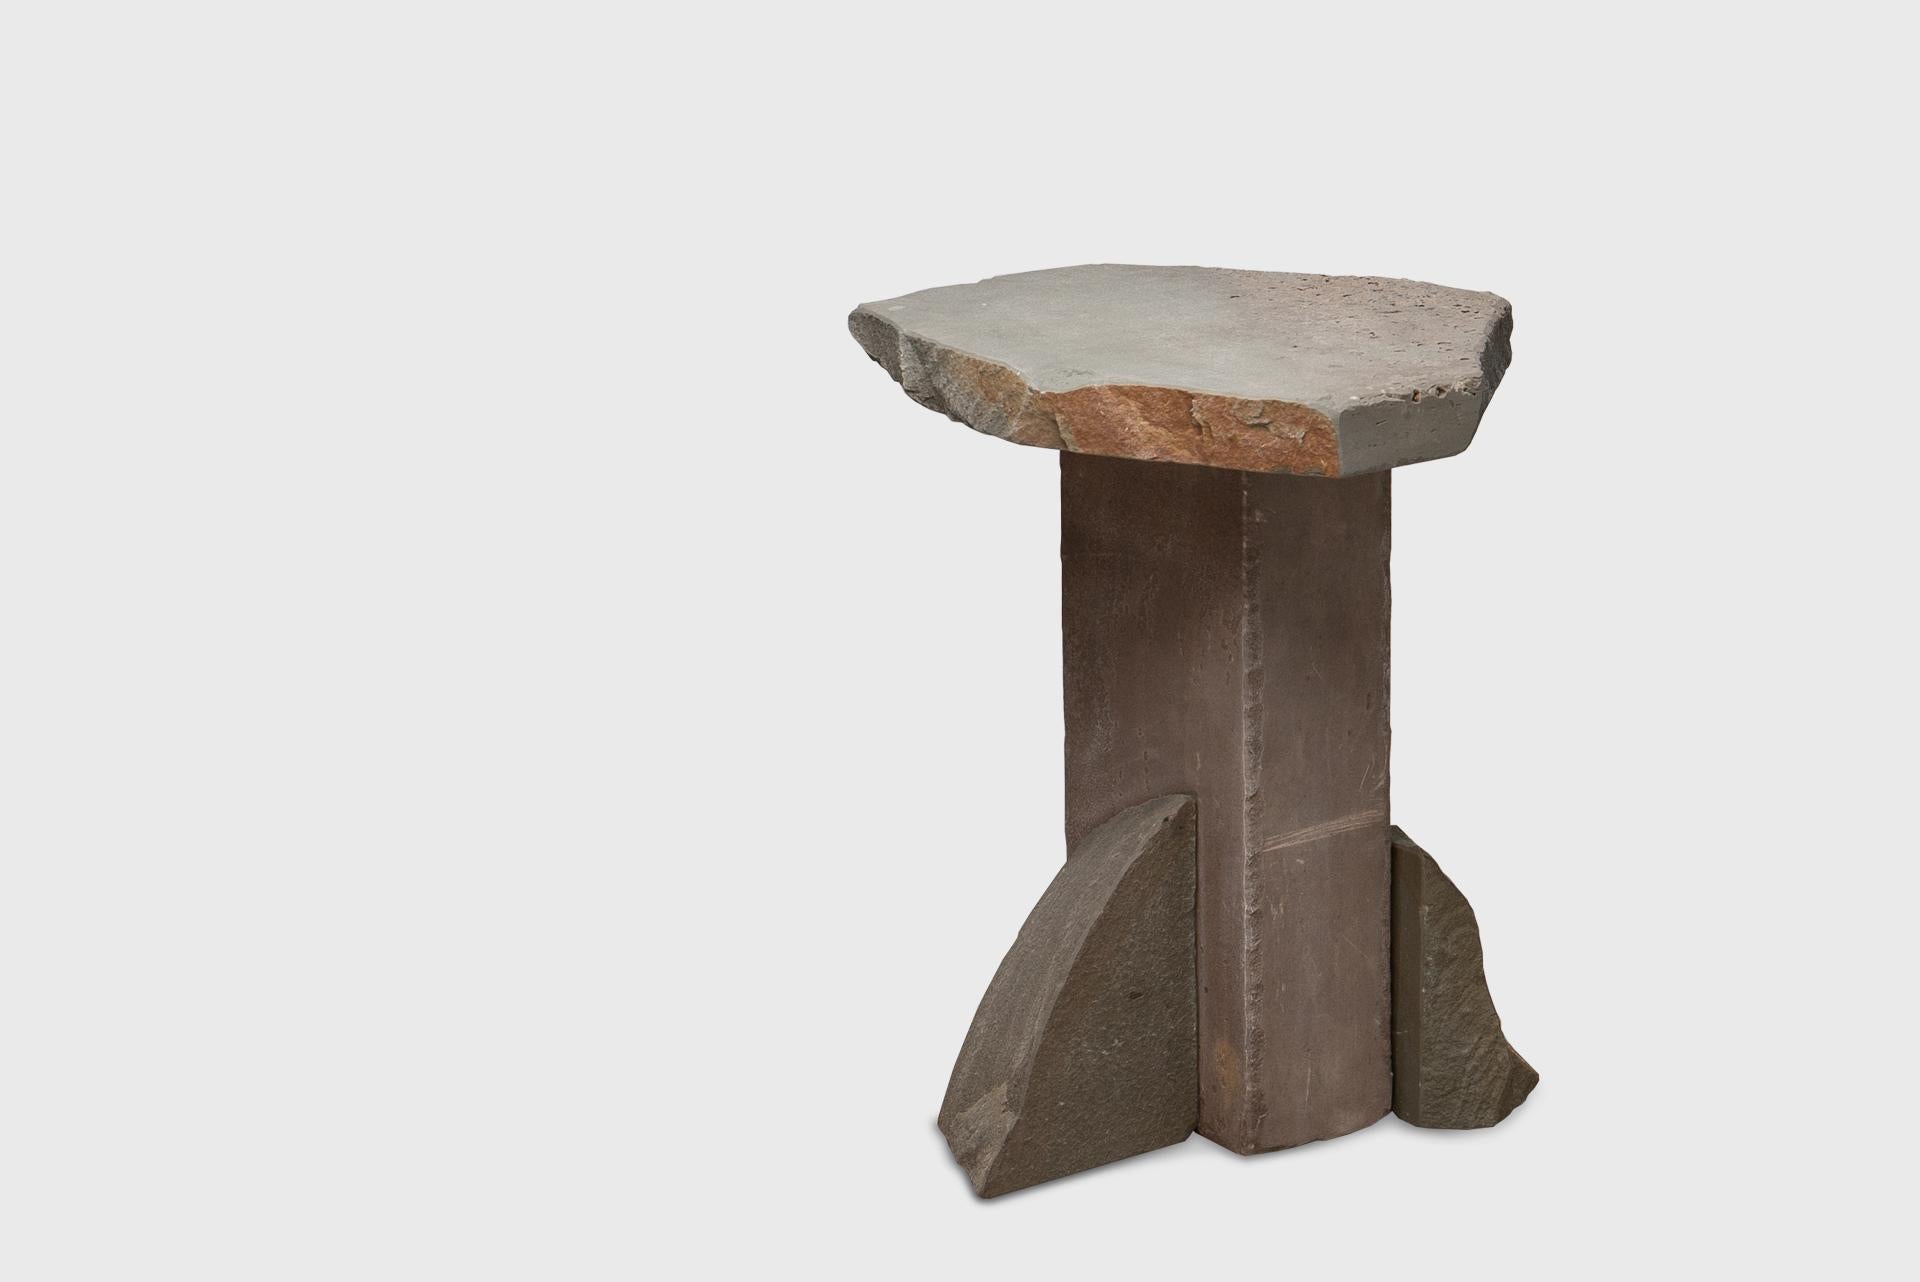 From Graywacke Offcut Series.
Manufactured by Carsten in der Elst .
Exclusively for SIDE.
Germany, 2023.
Greywacke stone, felt.

Measurements
33 x 36 x 44,5h cm
13 x 14,2 x 17,5h in

Provenance
Cologne, Germany.

Exhibitions
Sourcing